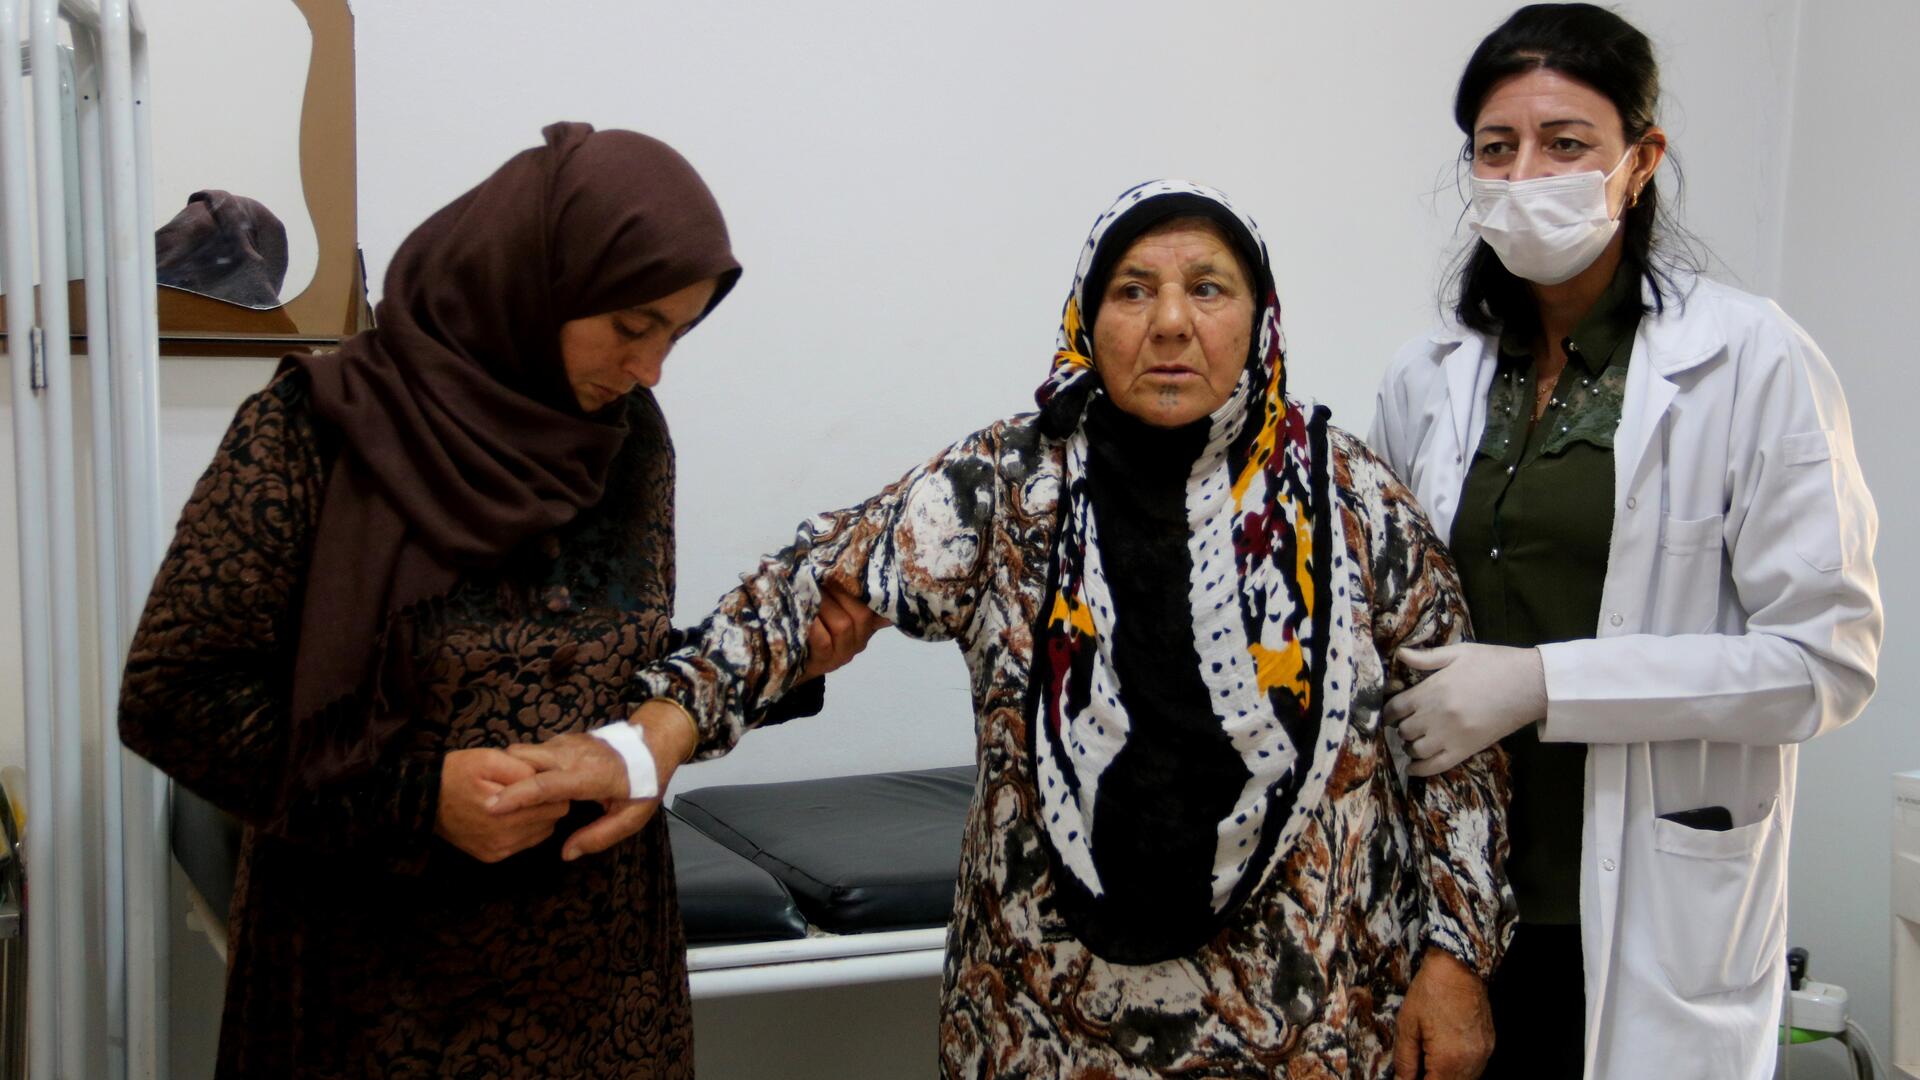 An elderly woman is assisted by a doctor and a relative in a health facility in Syria.